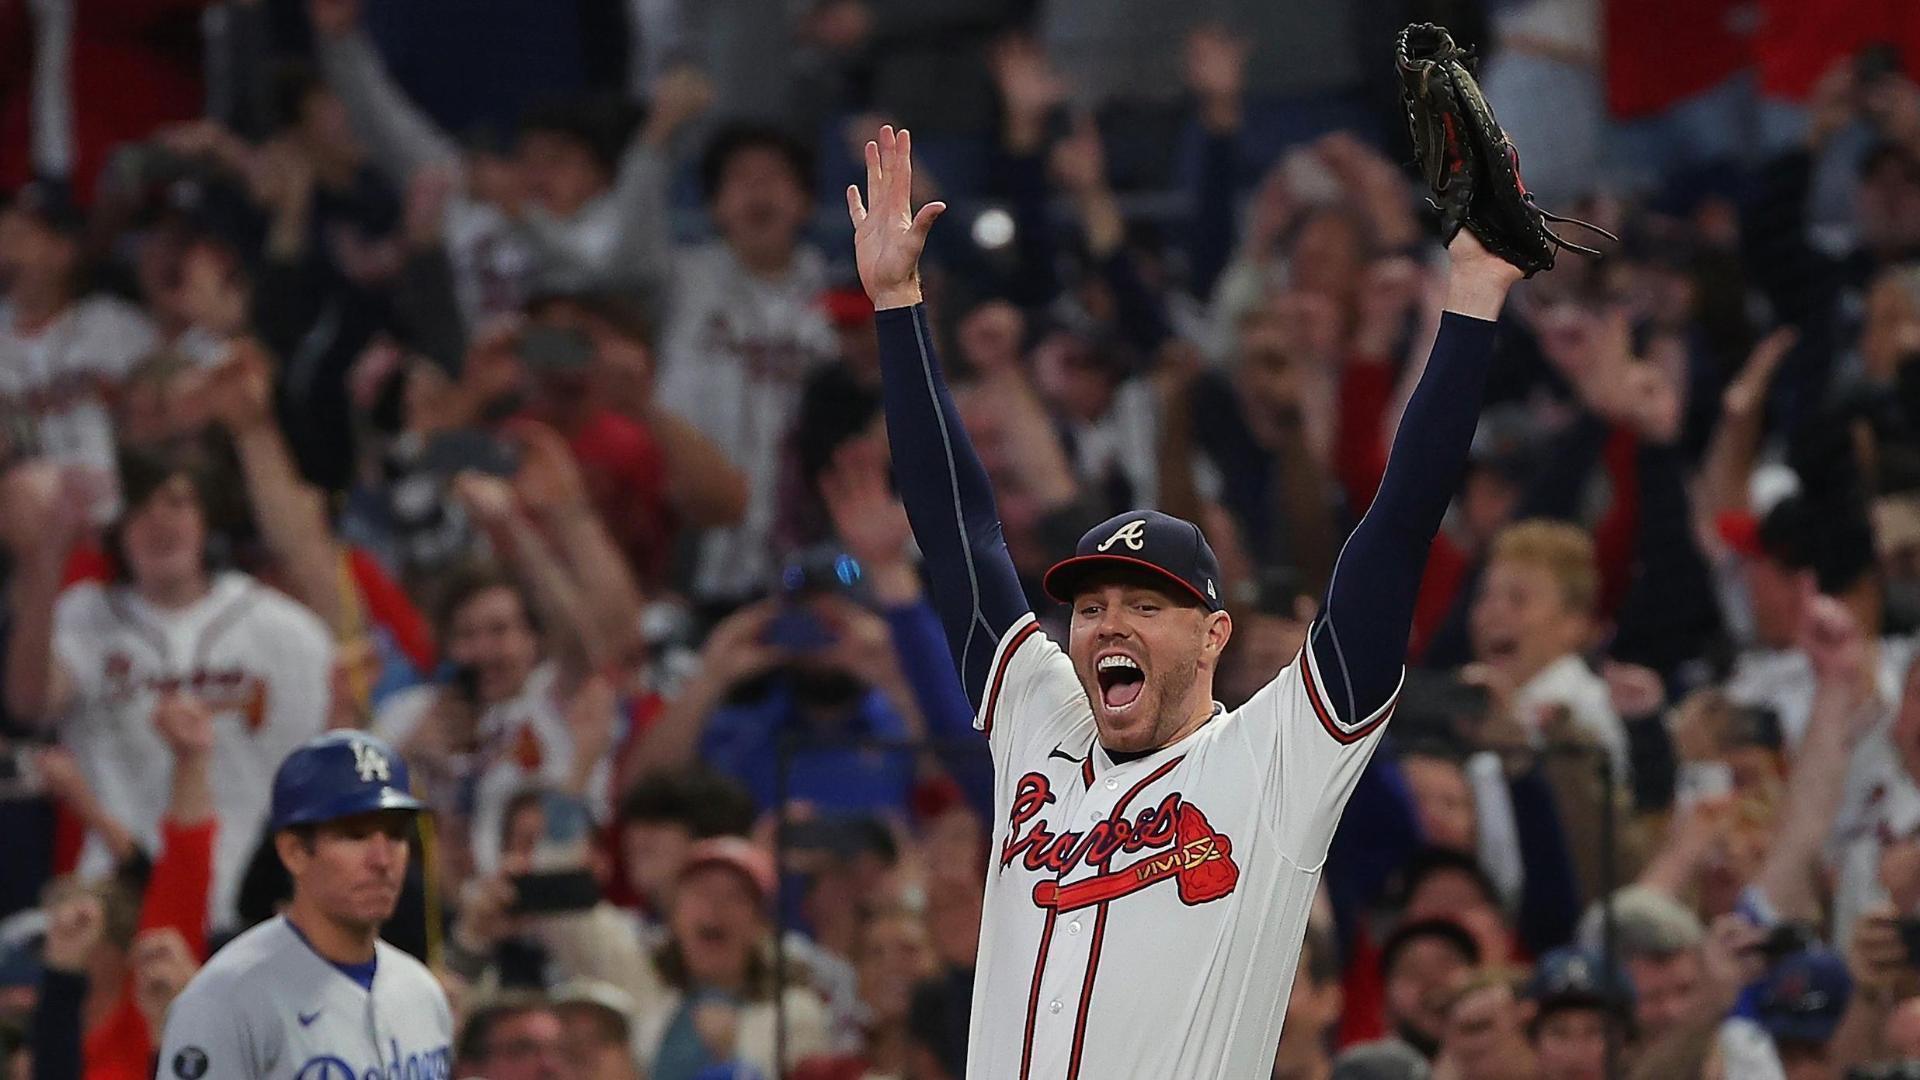 Braves advance to 1st World Series since 1999 after dramatic finish